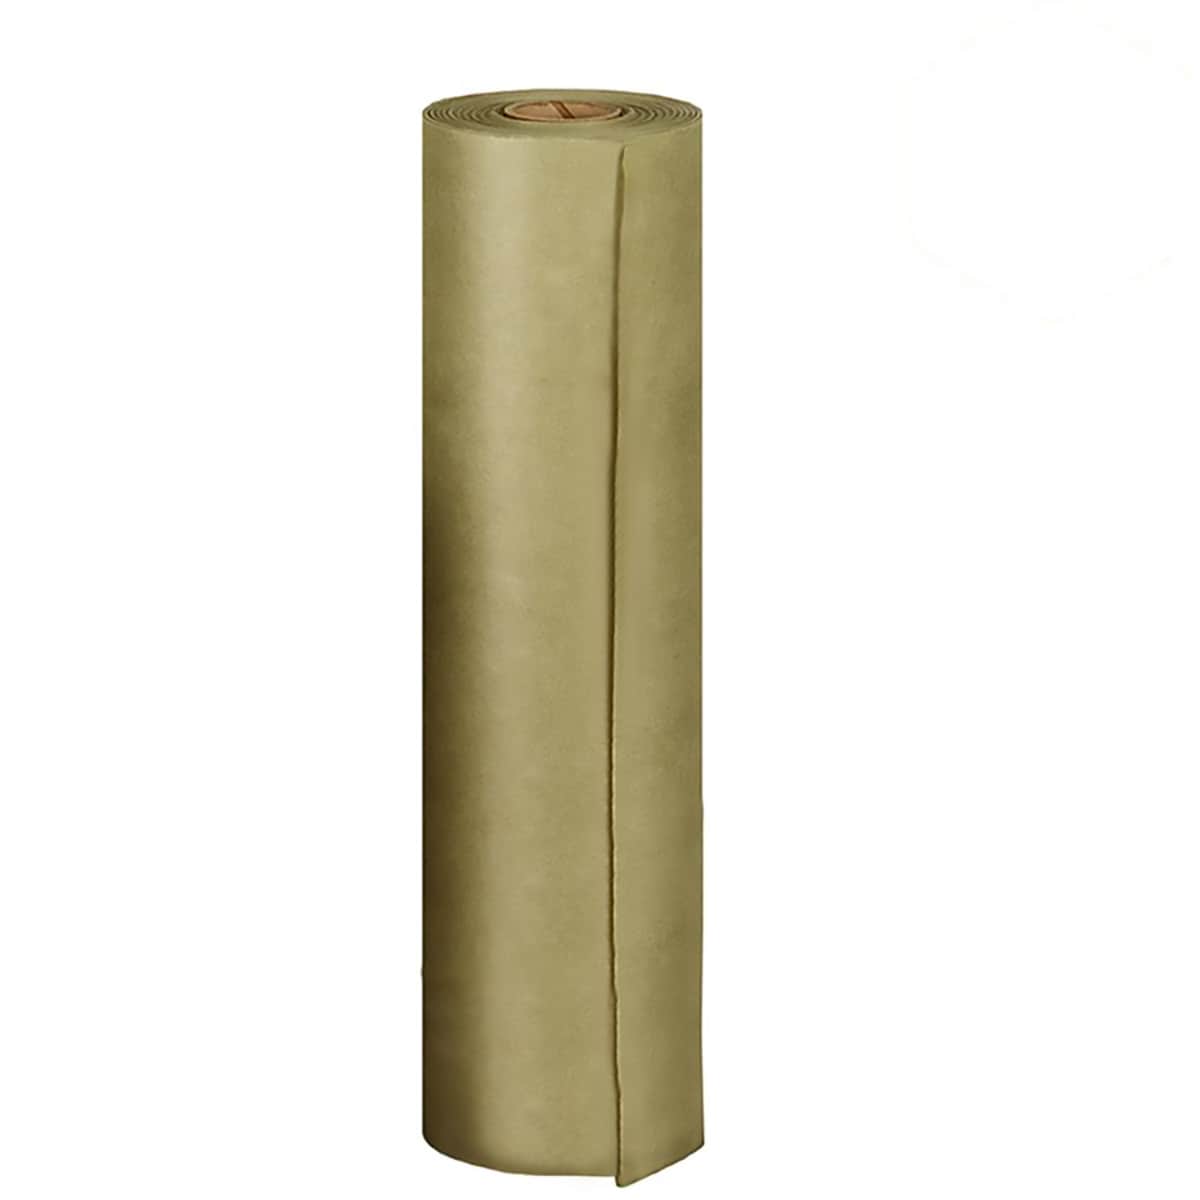 Pre-Taped Brown Masking Paper 24 inchx50' for Painting Tape and Drape Painters Paper, Paint Adhesive Protective Paper Roll for Car, and Furniture